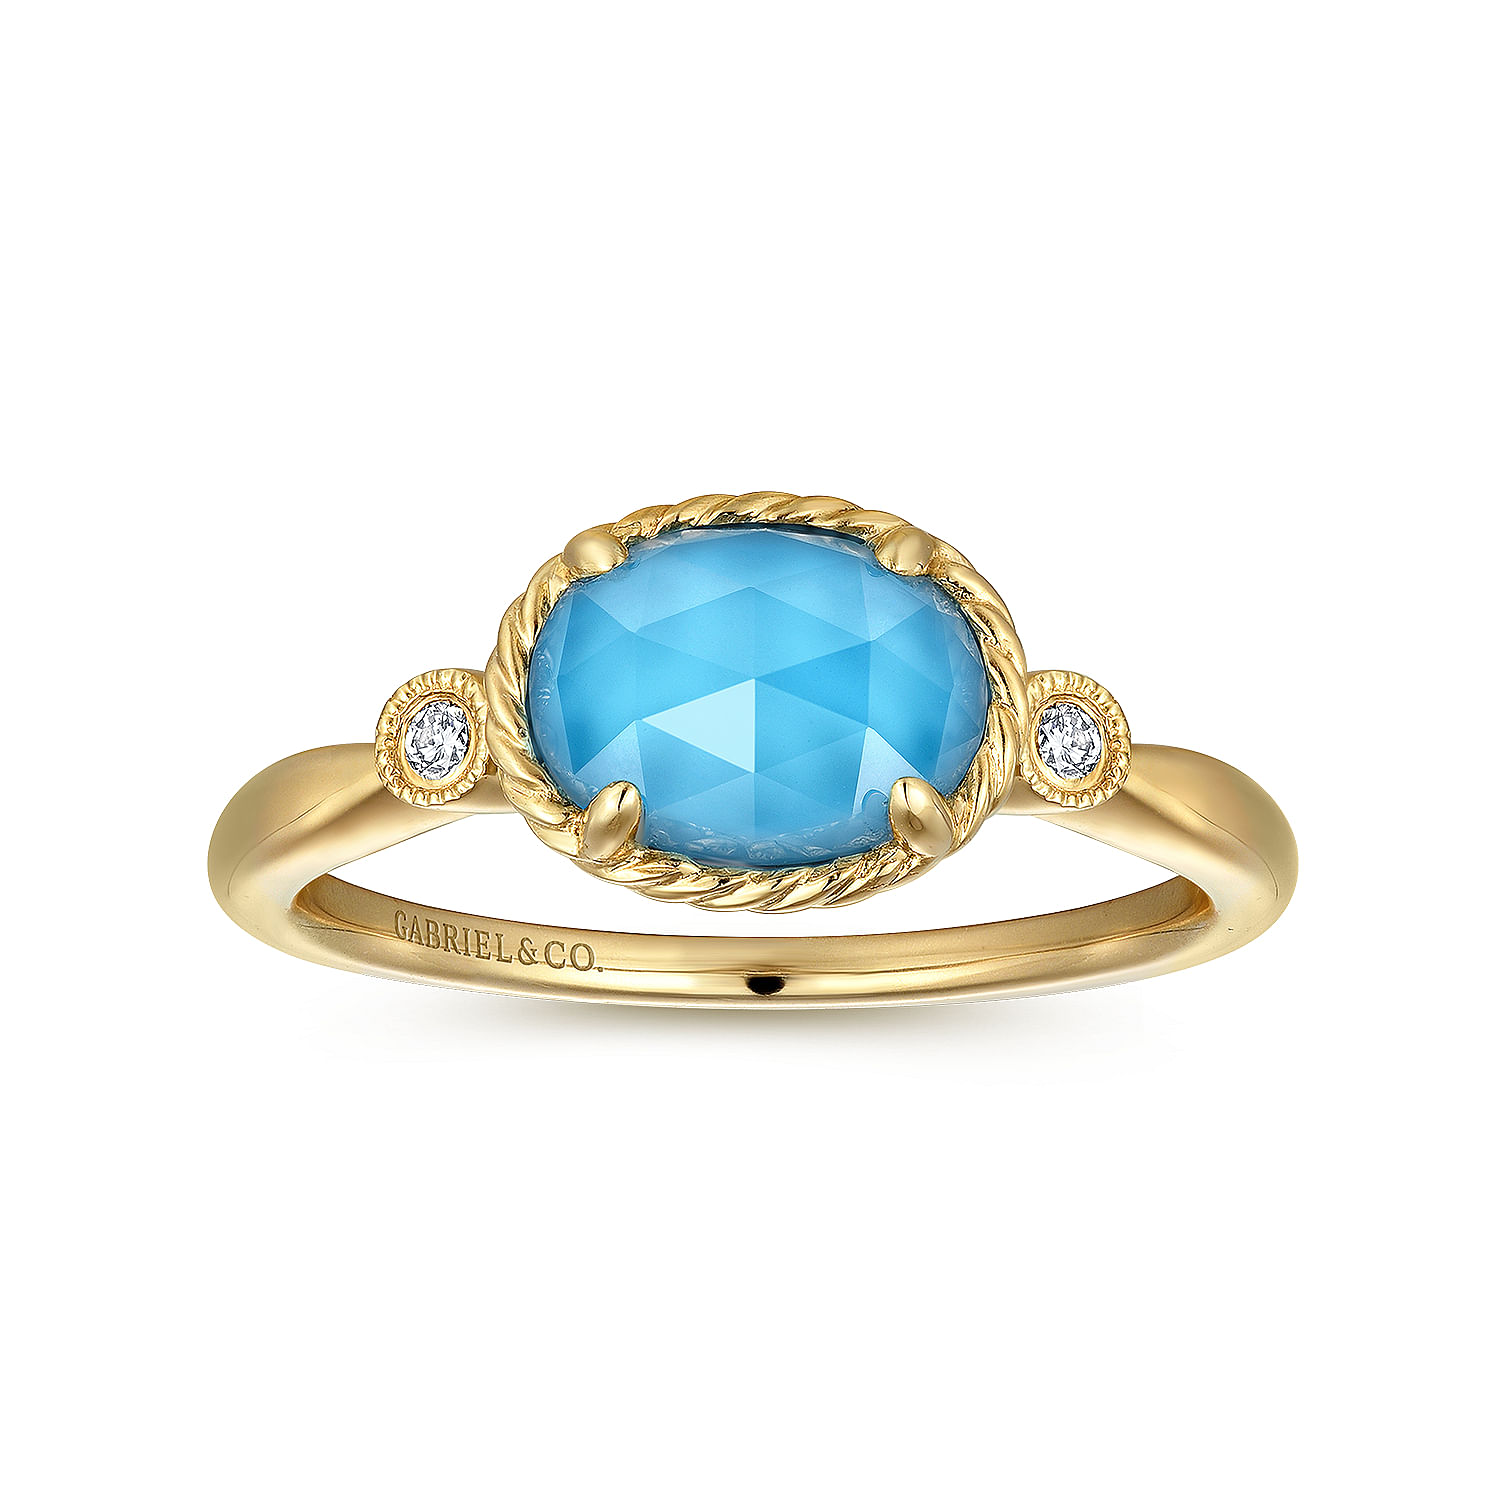 14K Yellow Gold Oval Rock Crystal/Turquoise Diamond Ring